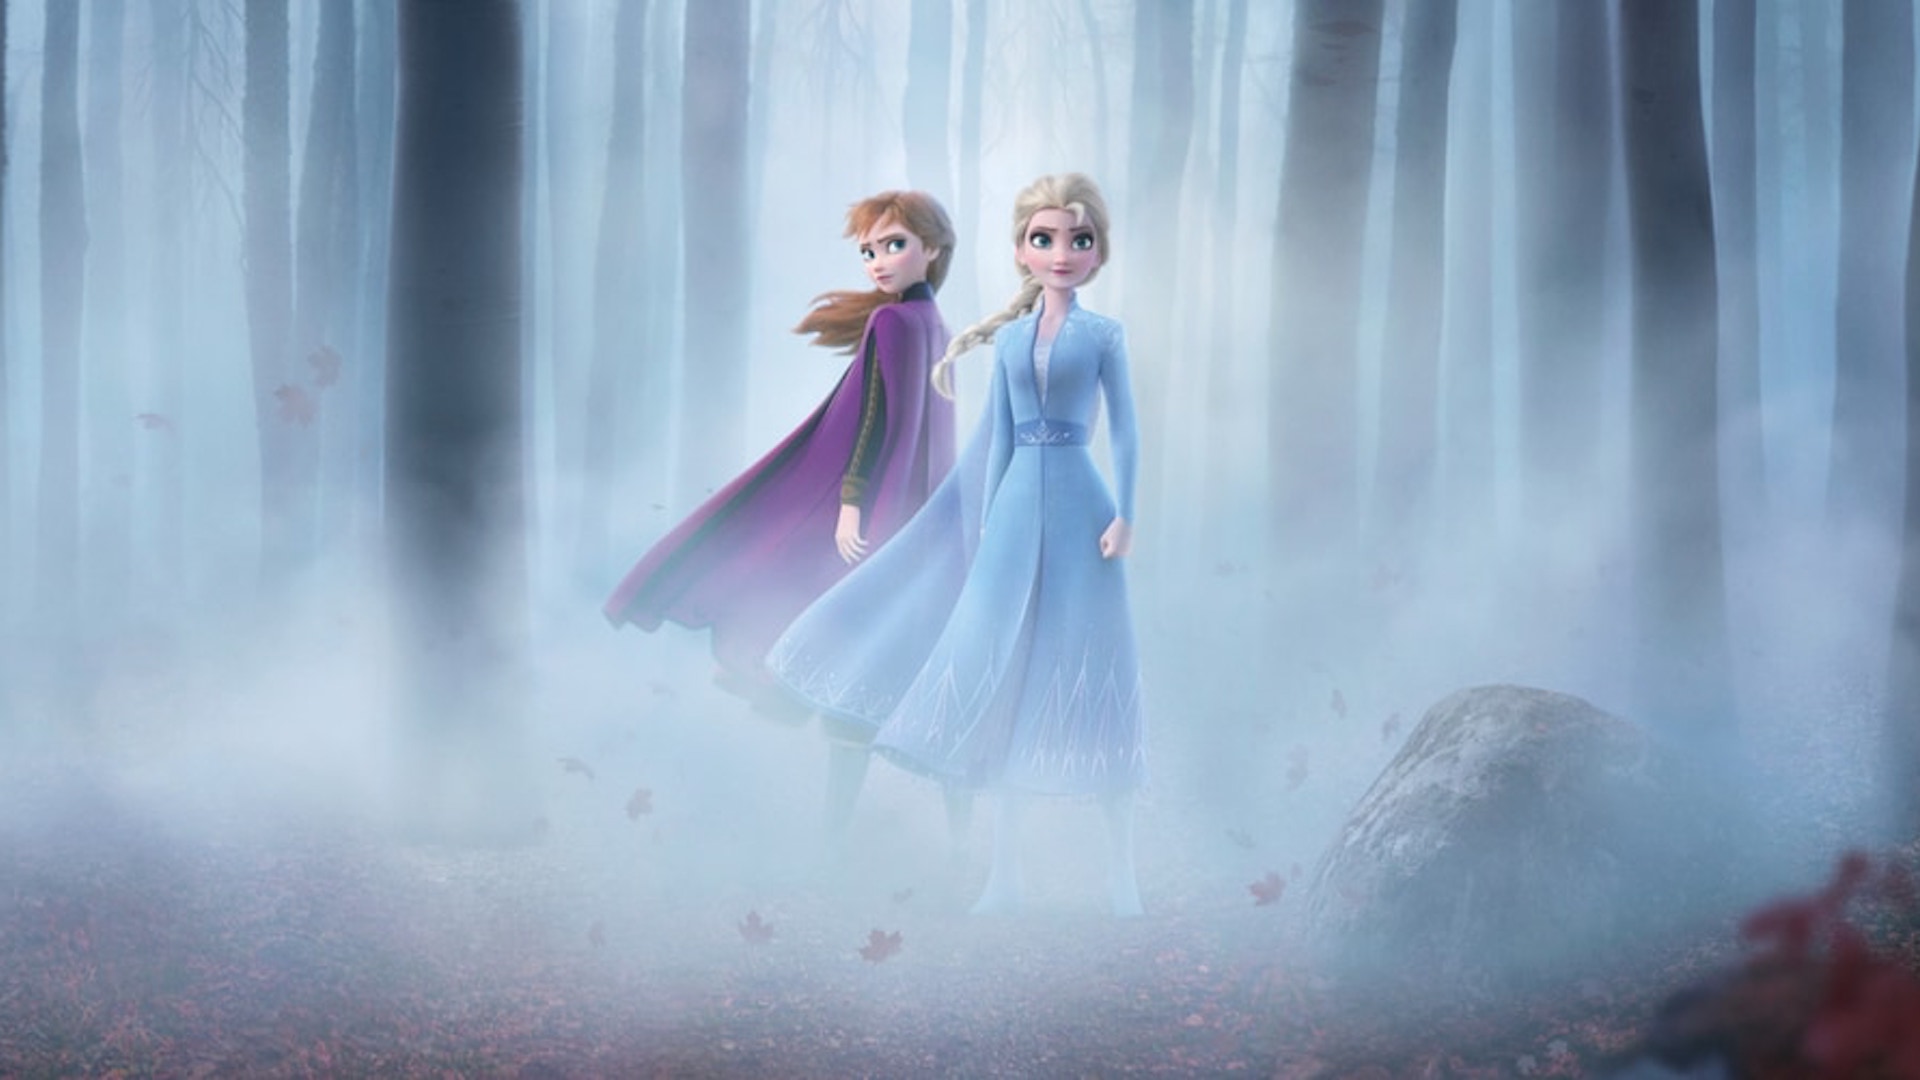 A promotional poster for Disney's Frozen 2